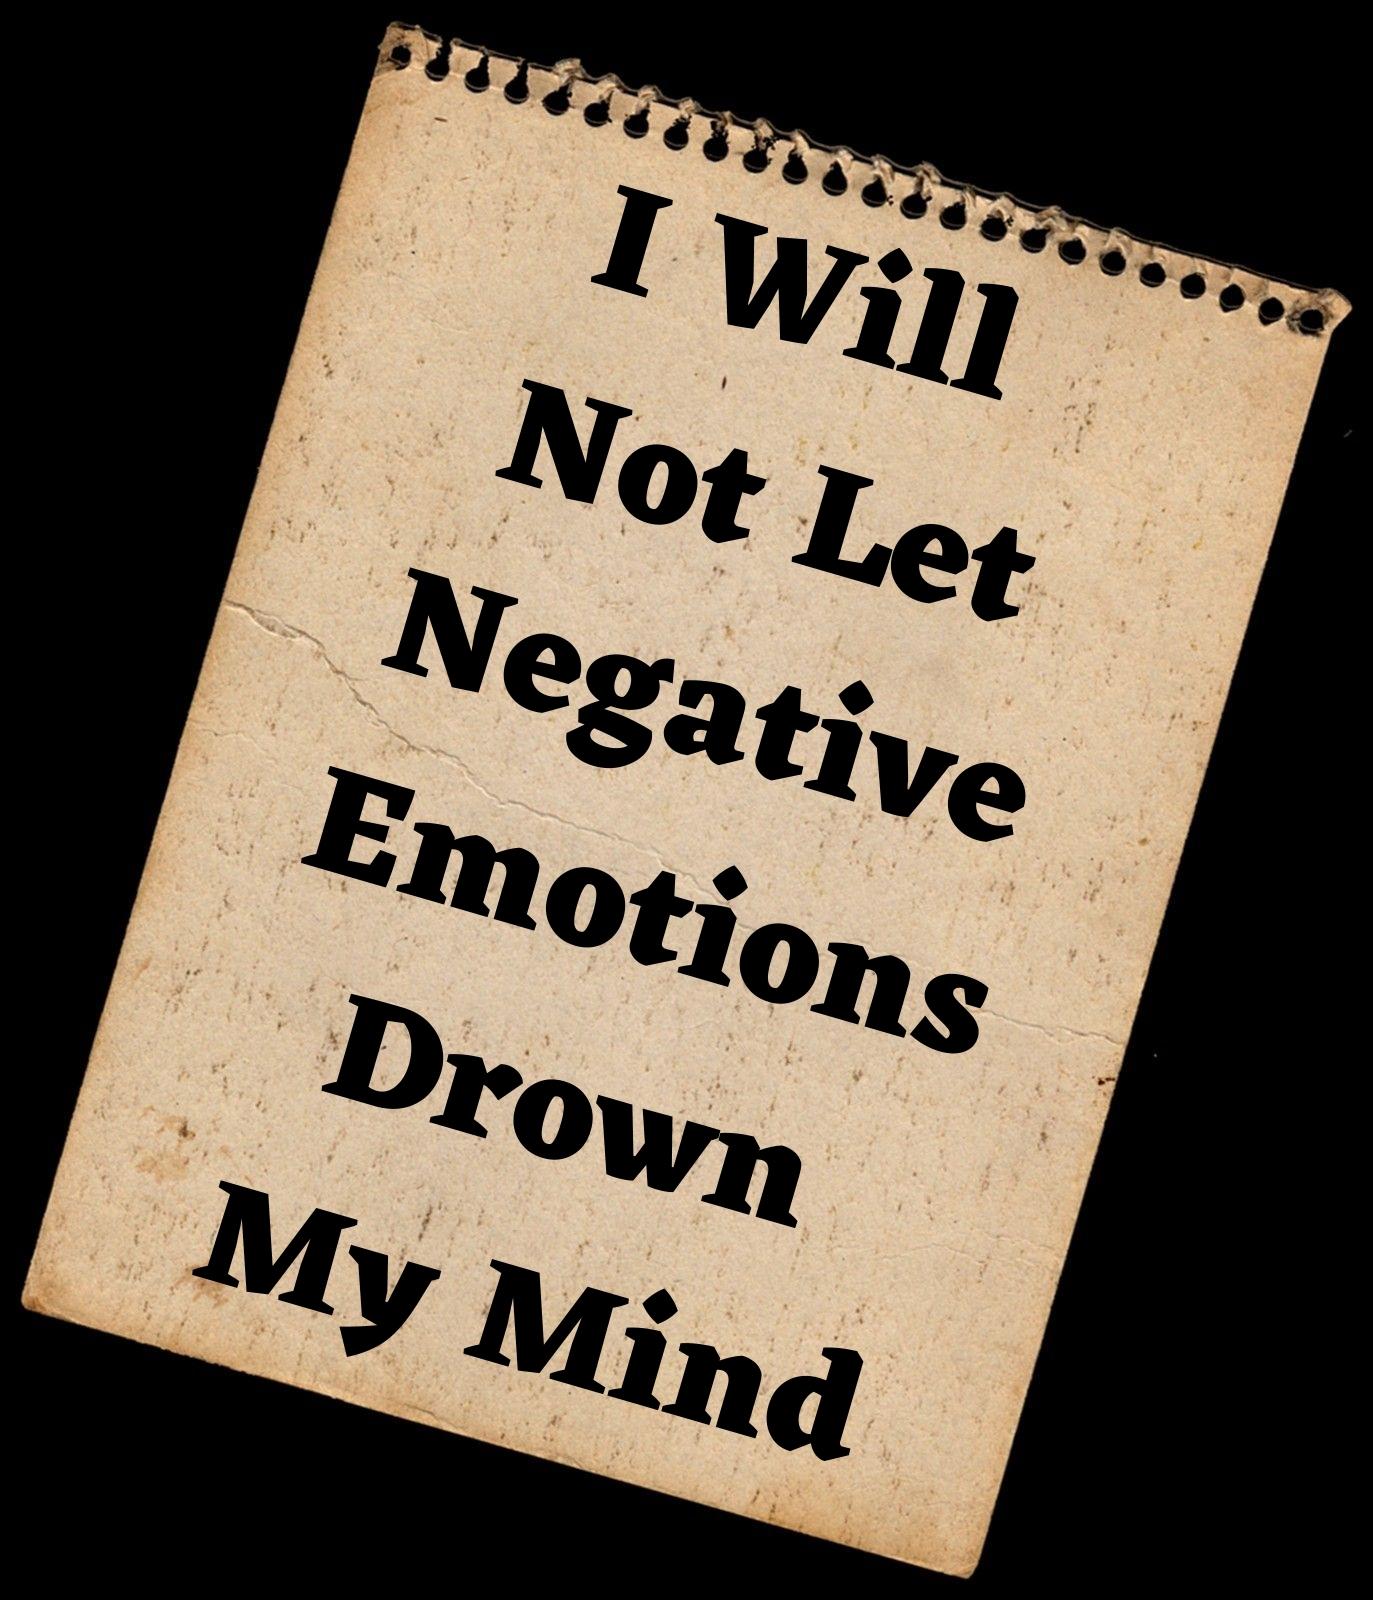 I WILL NOT LET NEGATIVE EMOTIONS DROWN MY MIND.